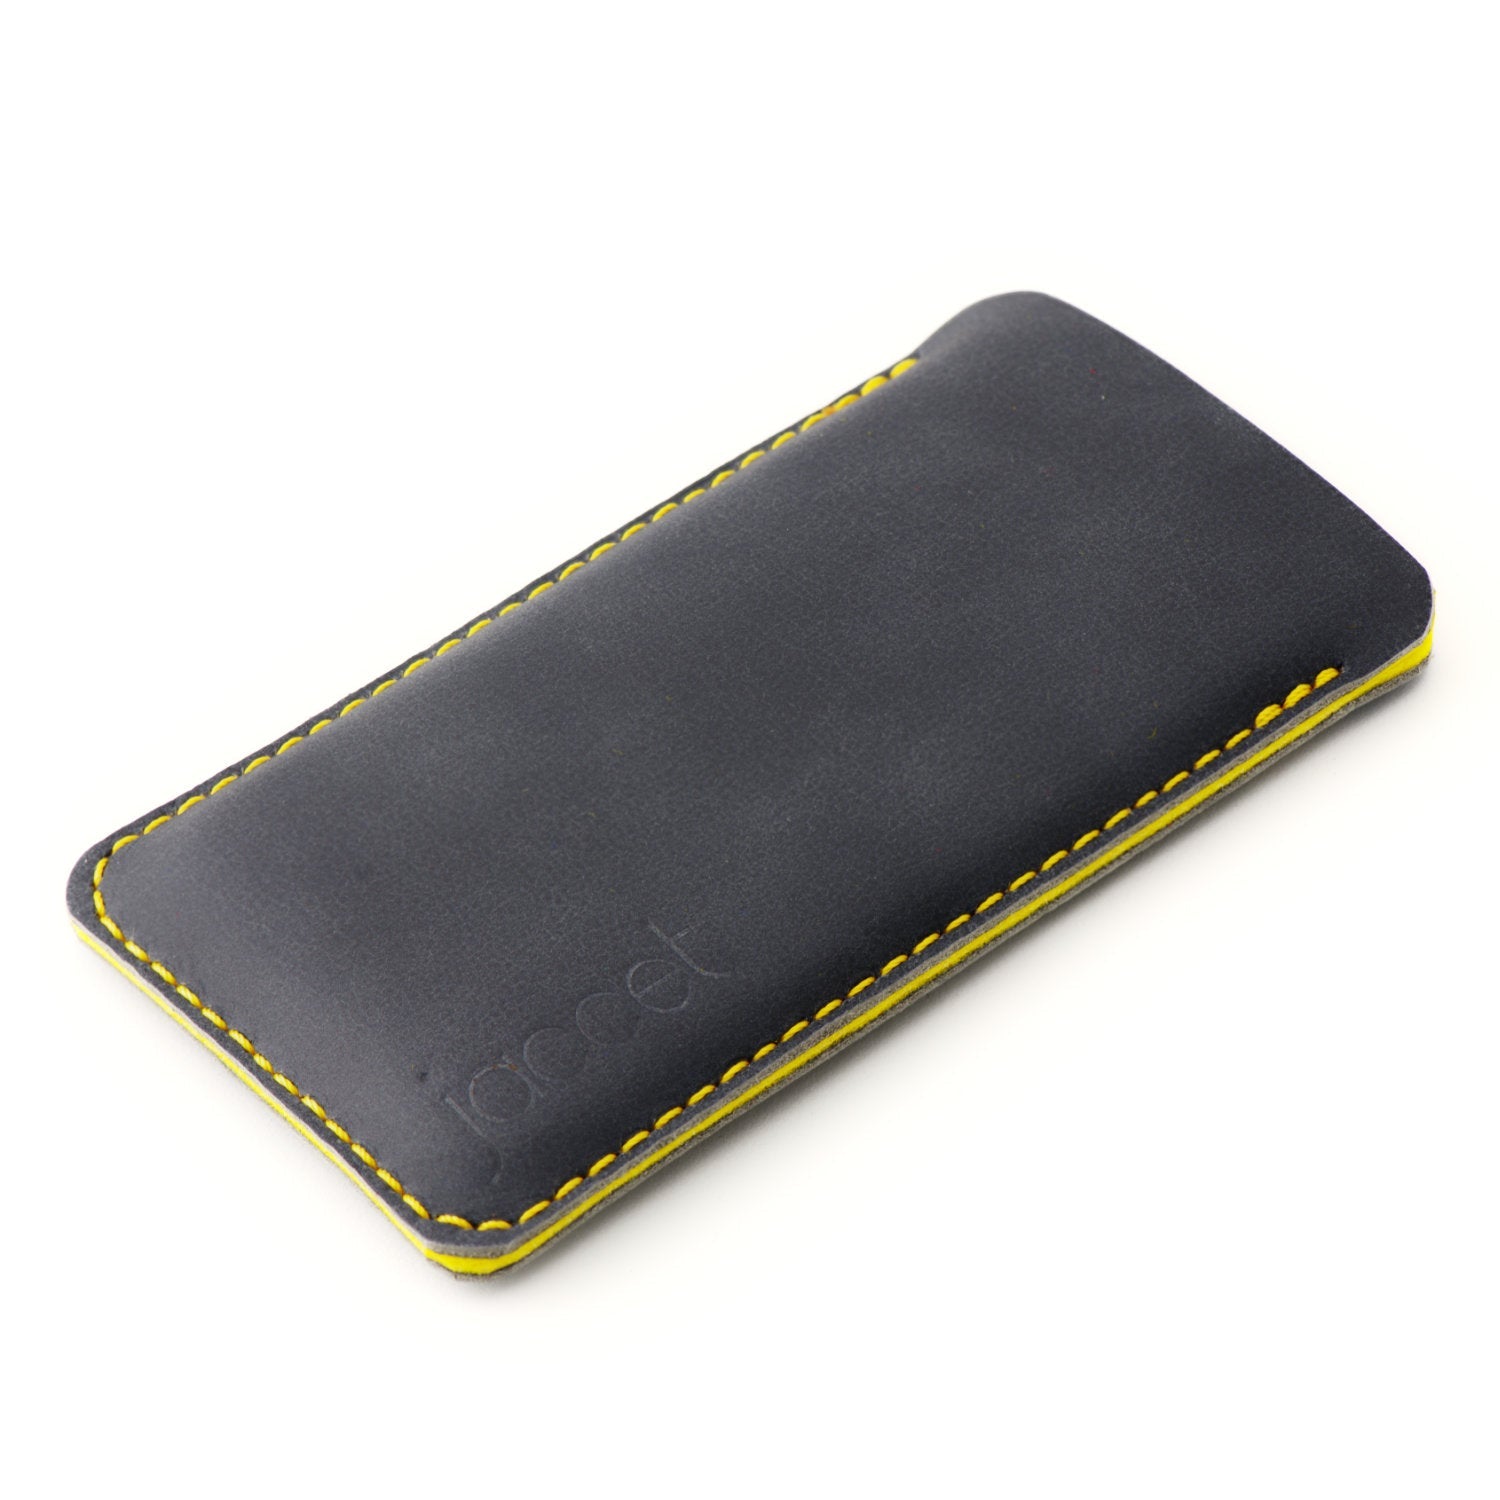 JACCET leather Google Pixel sleeve - anthracite/black leather with yellow wool felt. 100% Handmade